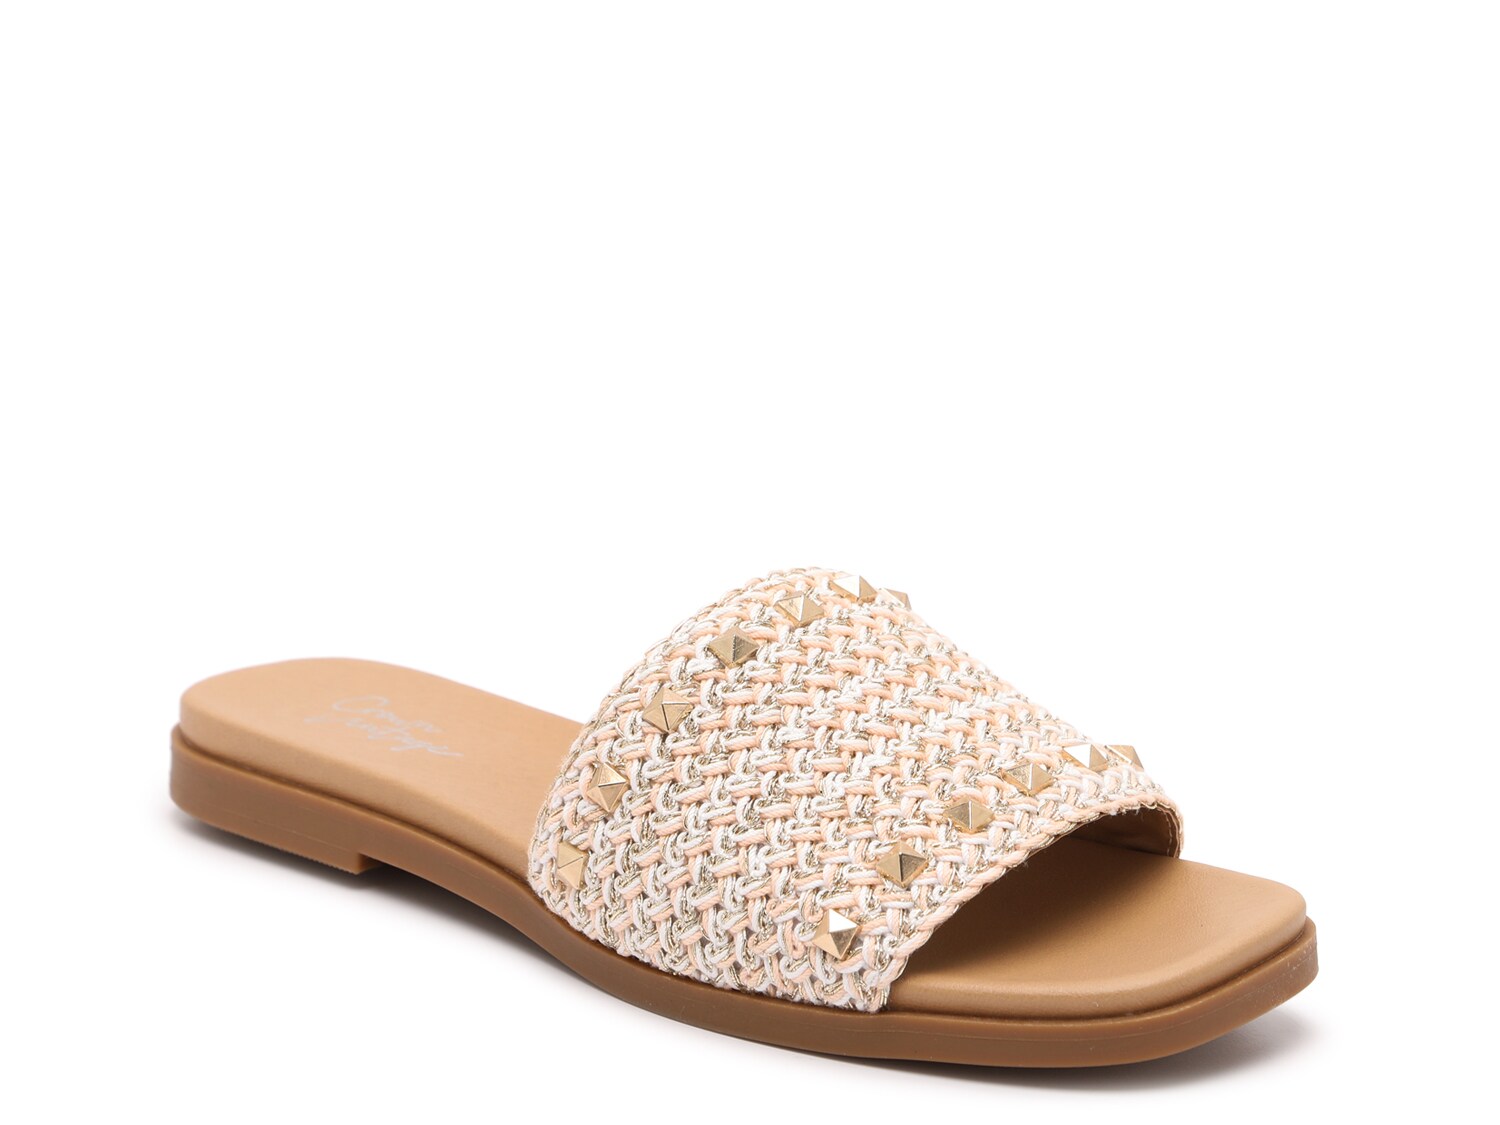 Crown Vintage Flory Sandal - Free Shipping | DSW